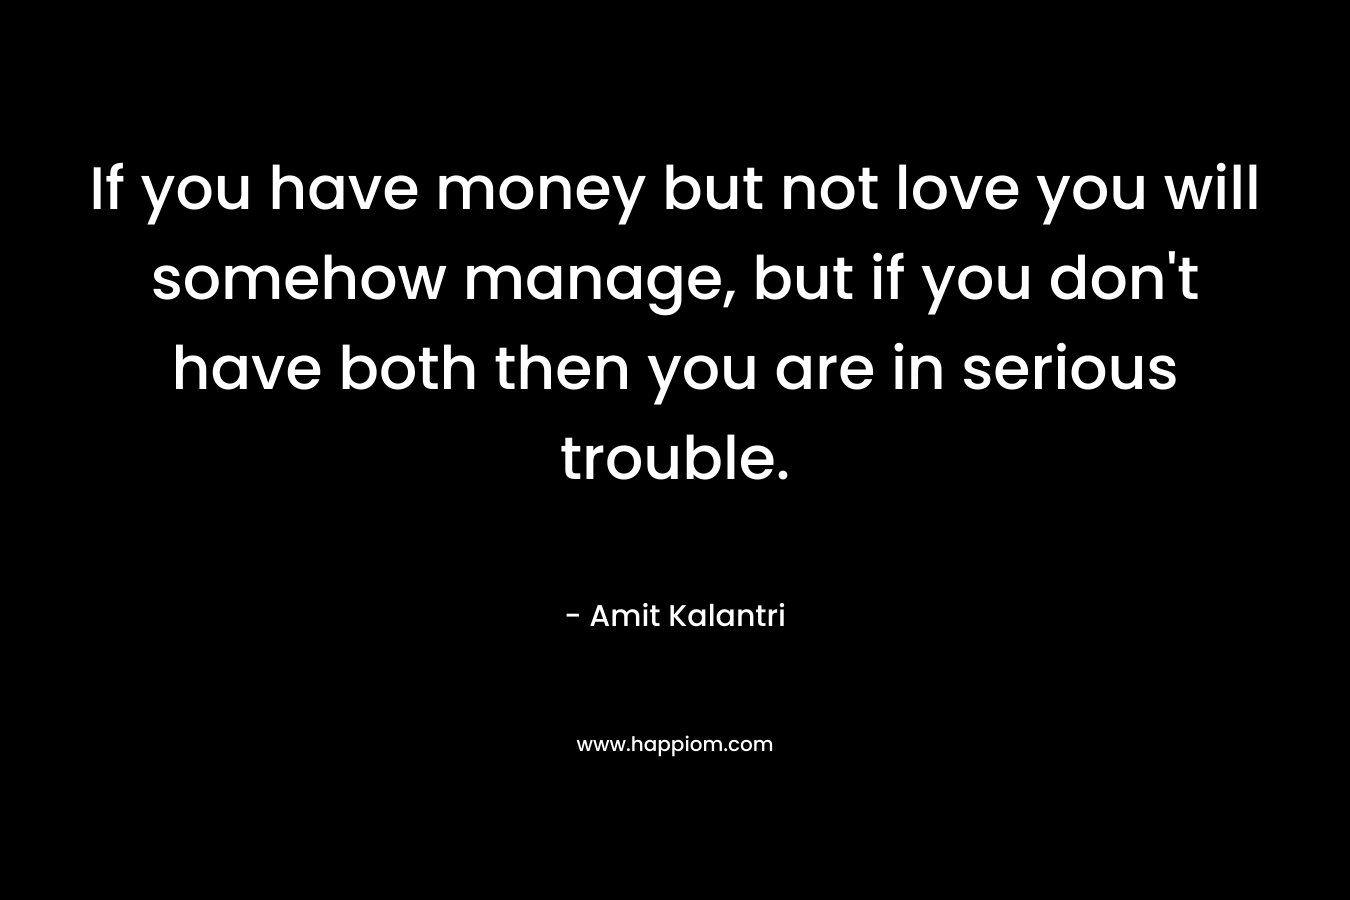 If you have money but not love you will somehow manage, but if you don't have both then you are in serious trouble.